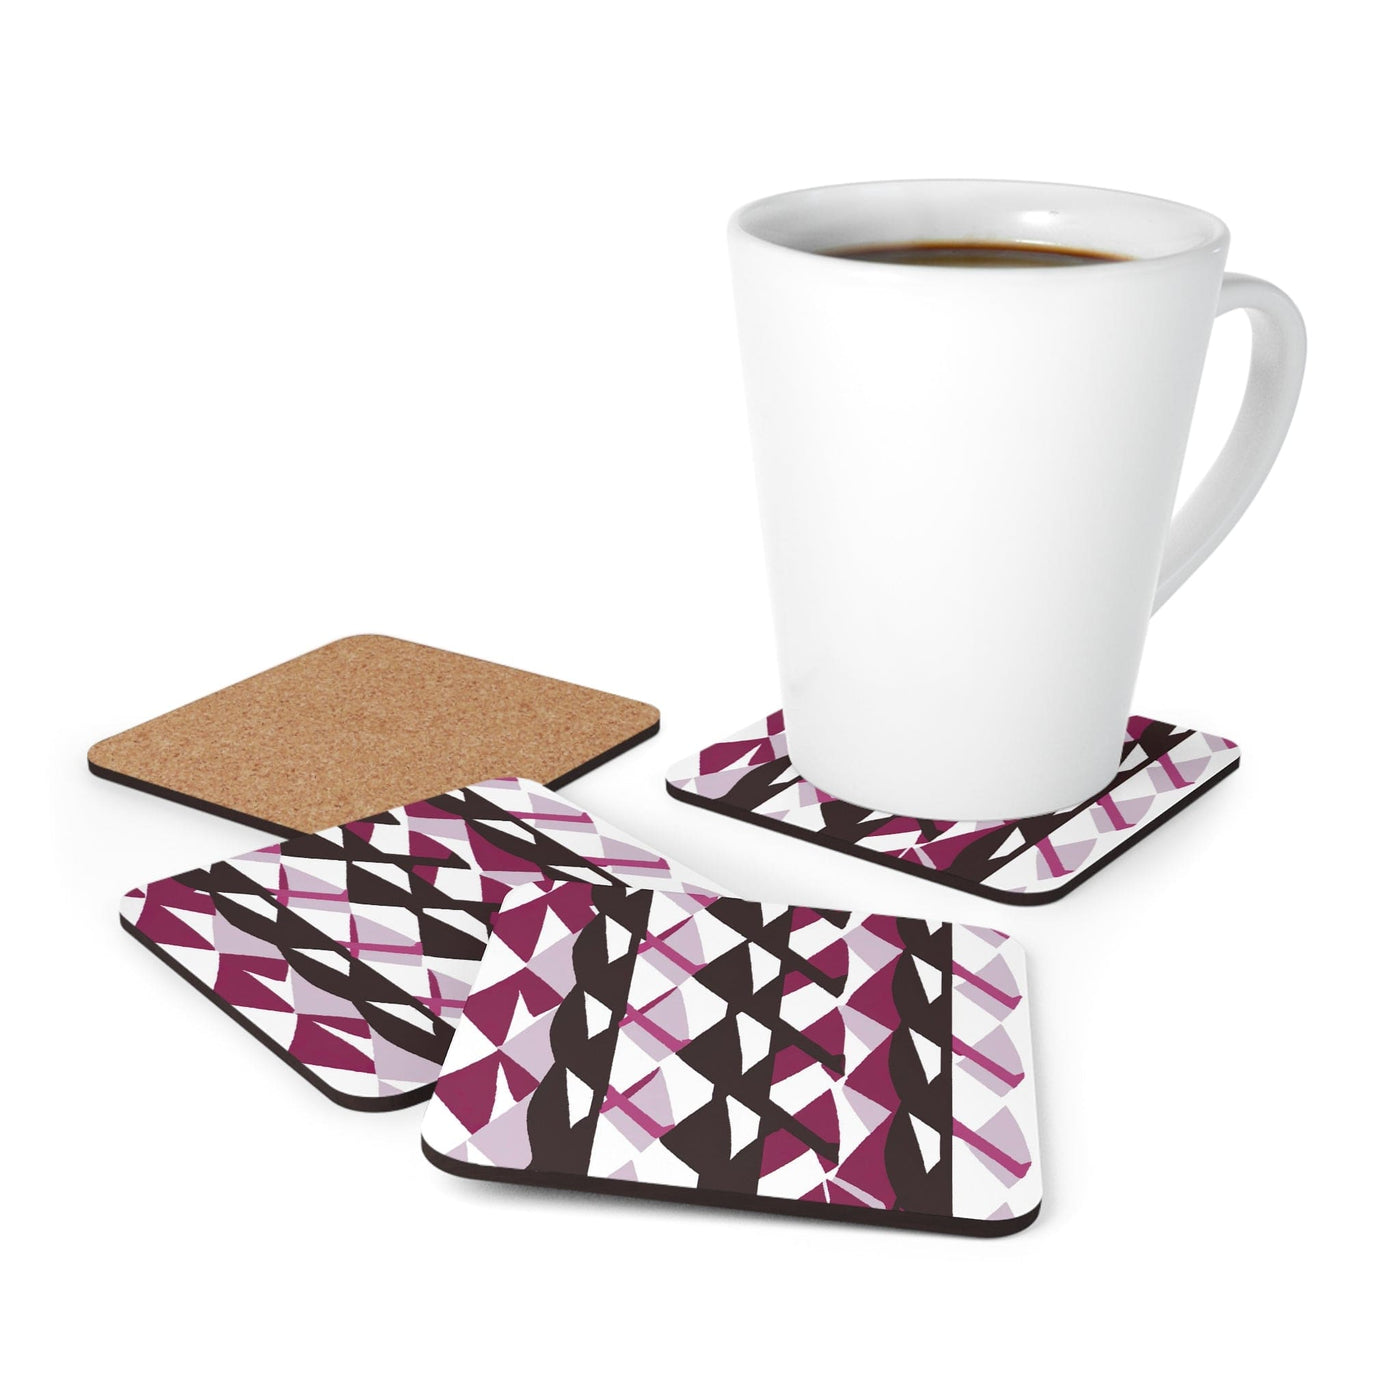 Handcrafted Square Coaster Set Of 4 For Drinks And Cups Pink Mauve Pattern